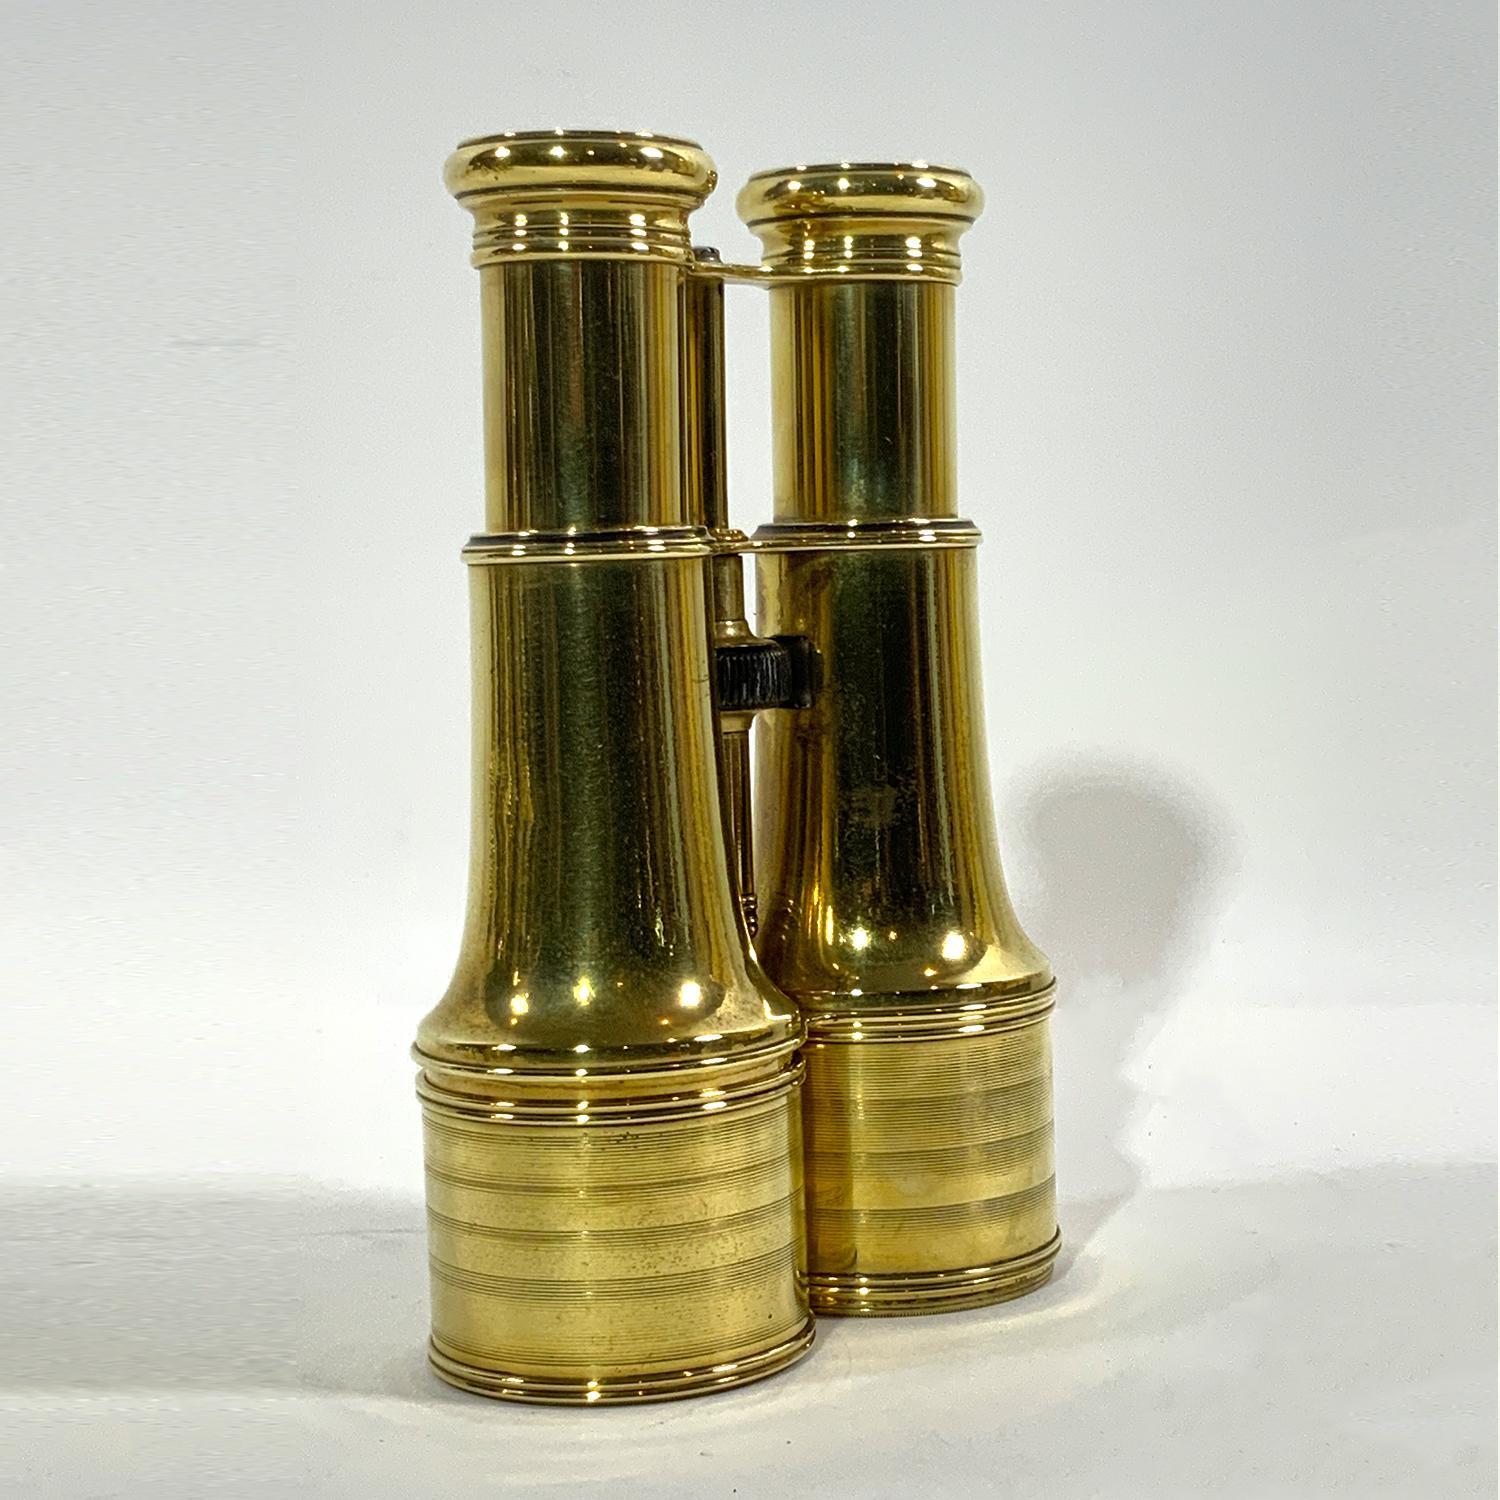 World War I U.S. Navy Officer's binoculars. Binoculars are by Lemaire of Paris as embossed on eyepieces. Knurled focus knob, sun shades on twin barrels. Highly polished and lacquered, Circa 1890. Binoculars are engraved U.S. Navy Number 16638.